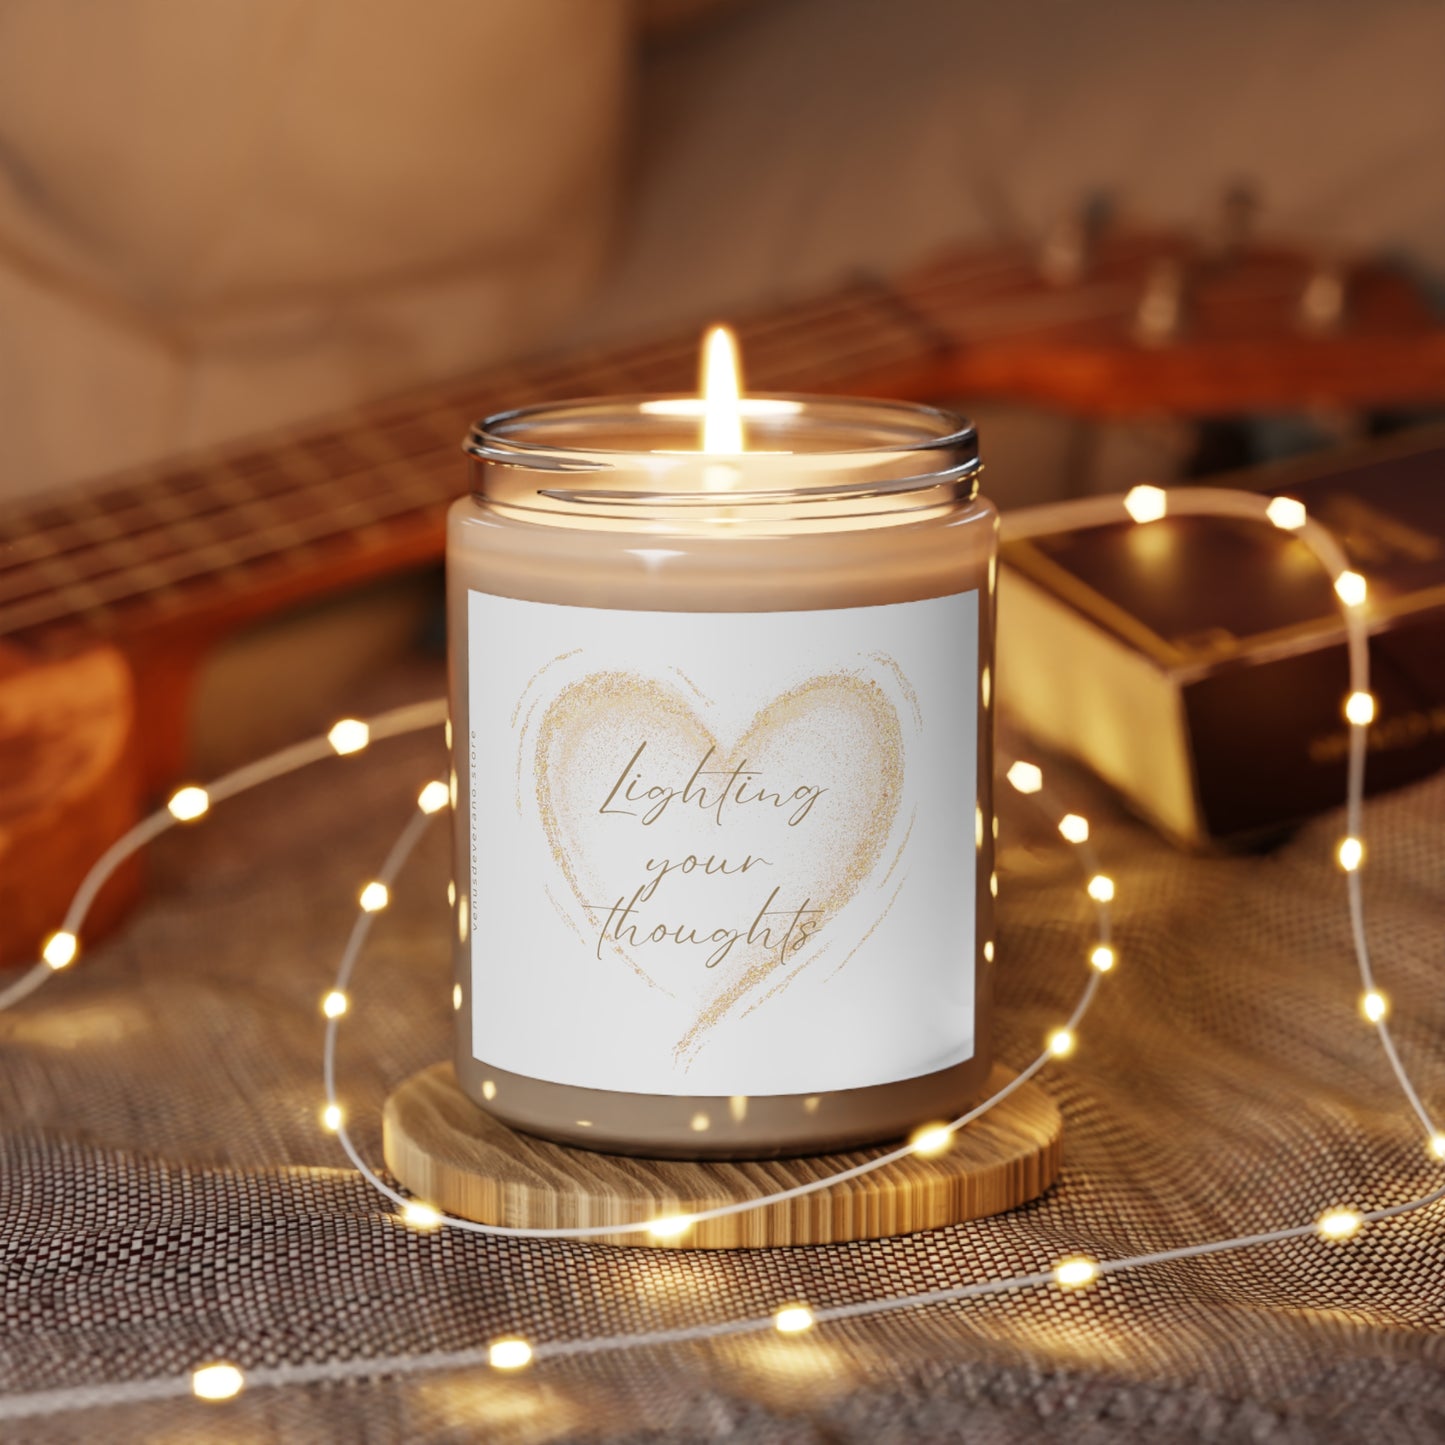 Scented Candle, 9oz - LIGHTING your thoughts - Made from vegan soy coconut wax, hand-poured | 2 ambrosial fragrances available, Cinnamon Stick and Vanilla.